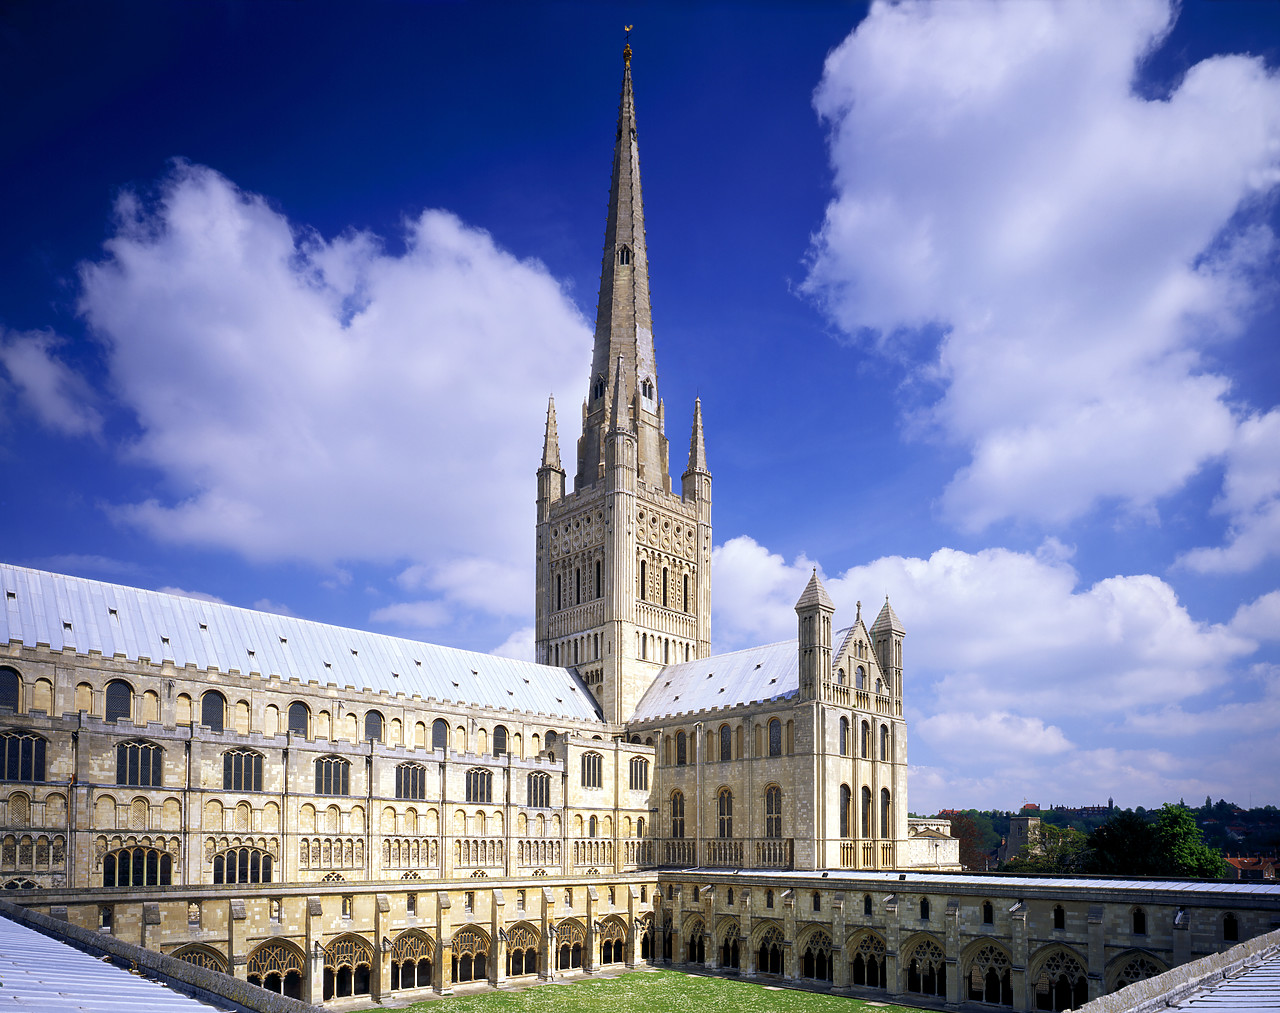 #970165-1 - Norwich Cathedral, Norwich, Norfolk, England